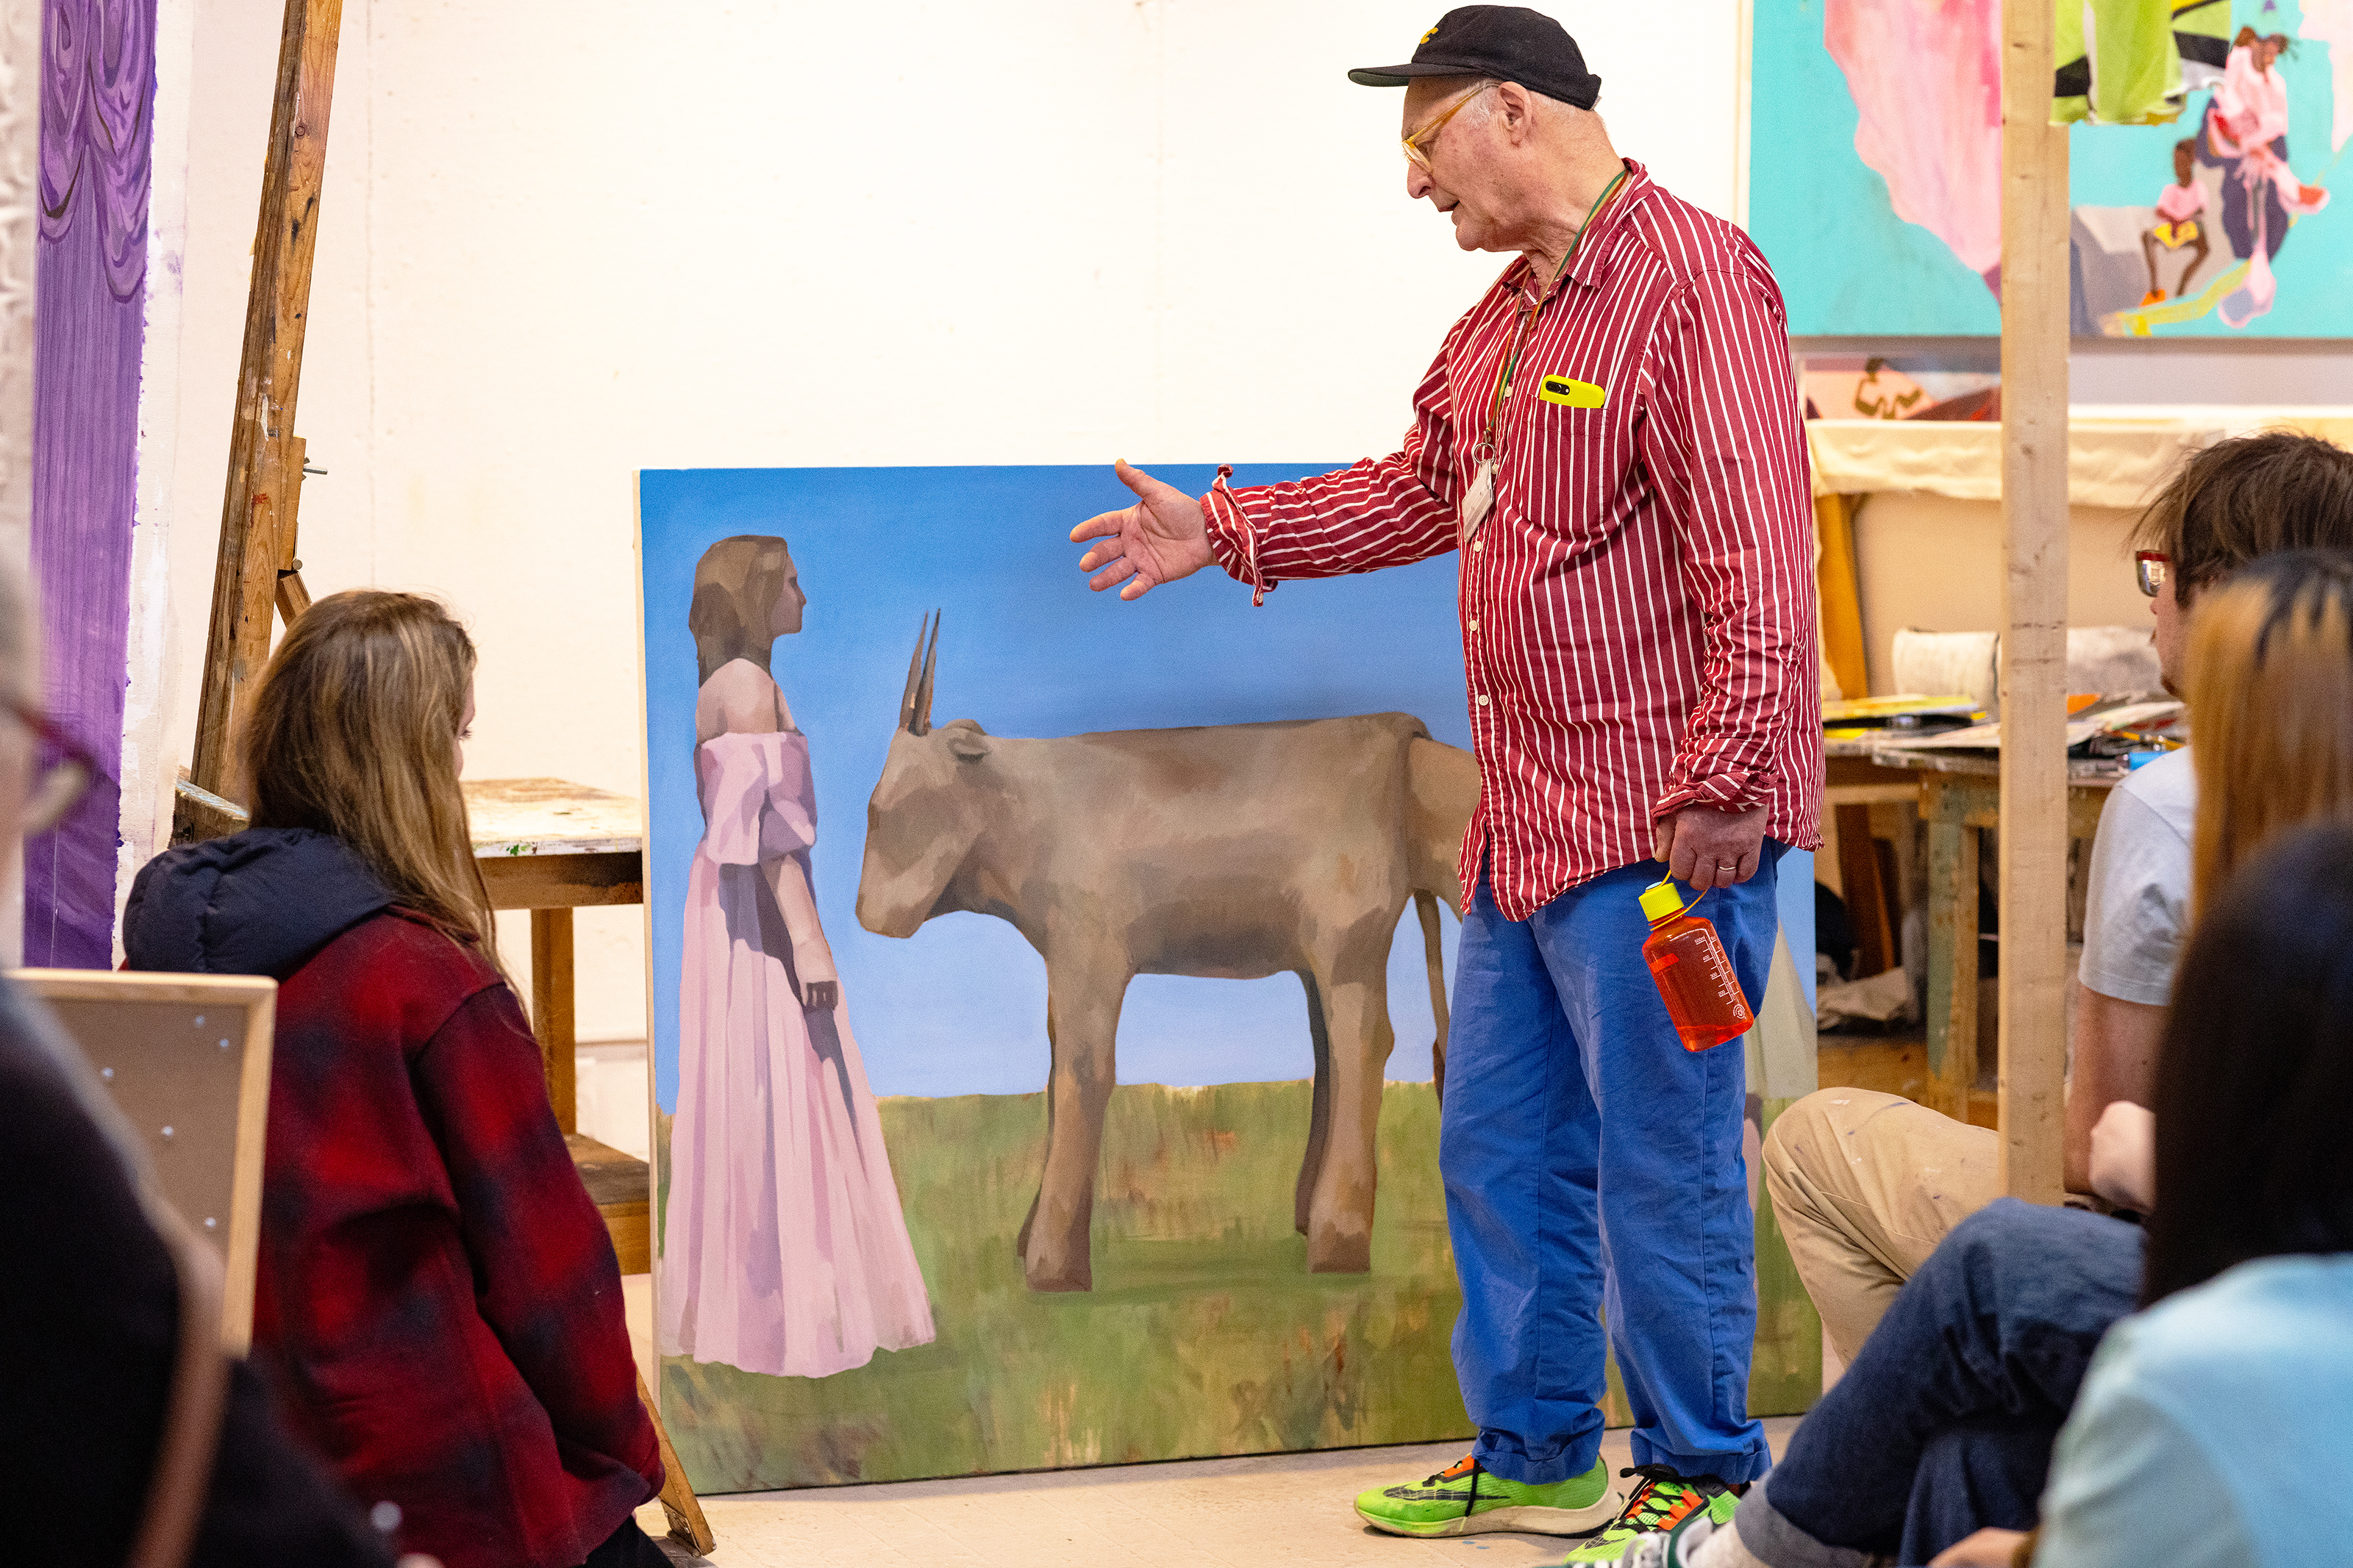 Professor Dennis Congdon discusses a quirky painting of two people and a cow